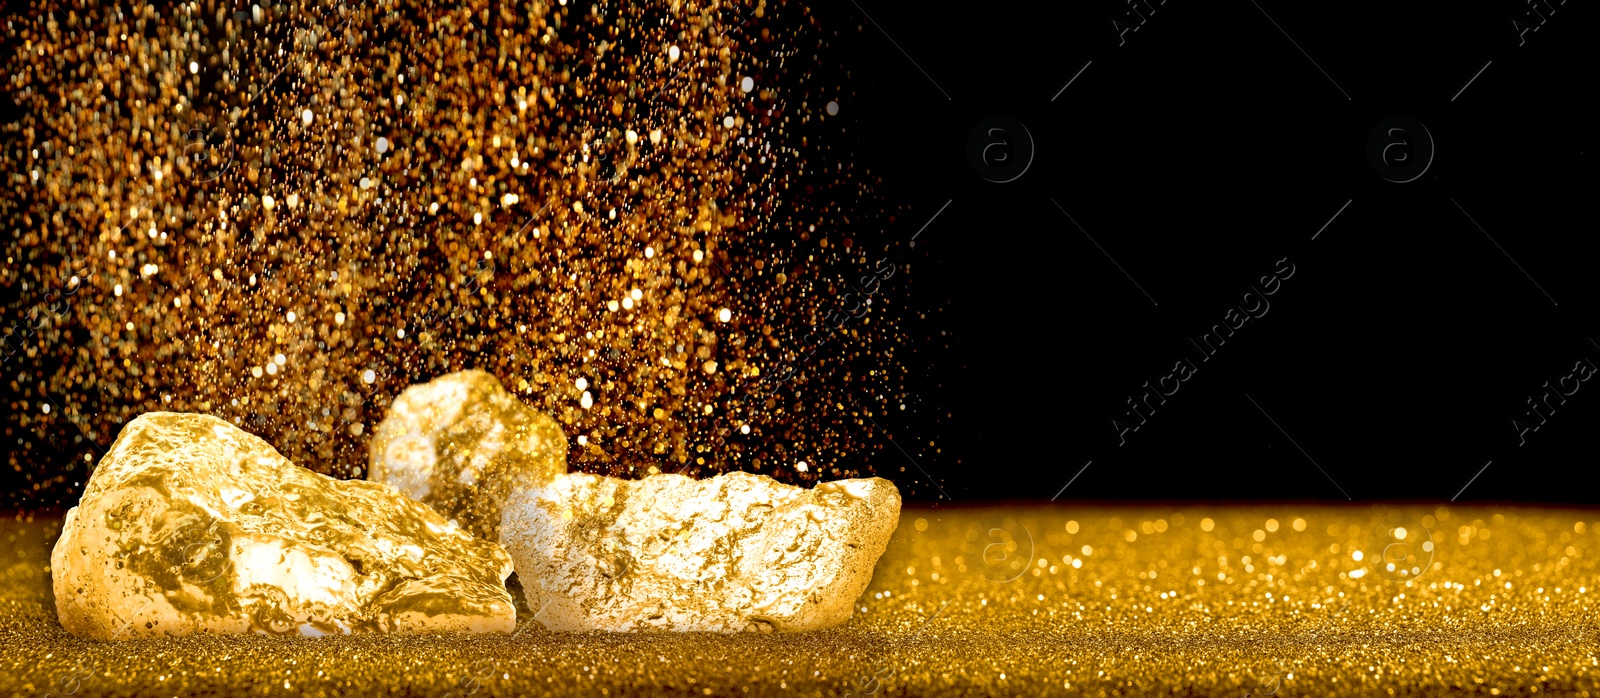 Image of Gold dust falling on gold nuggets against black background. Banner design with space for text